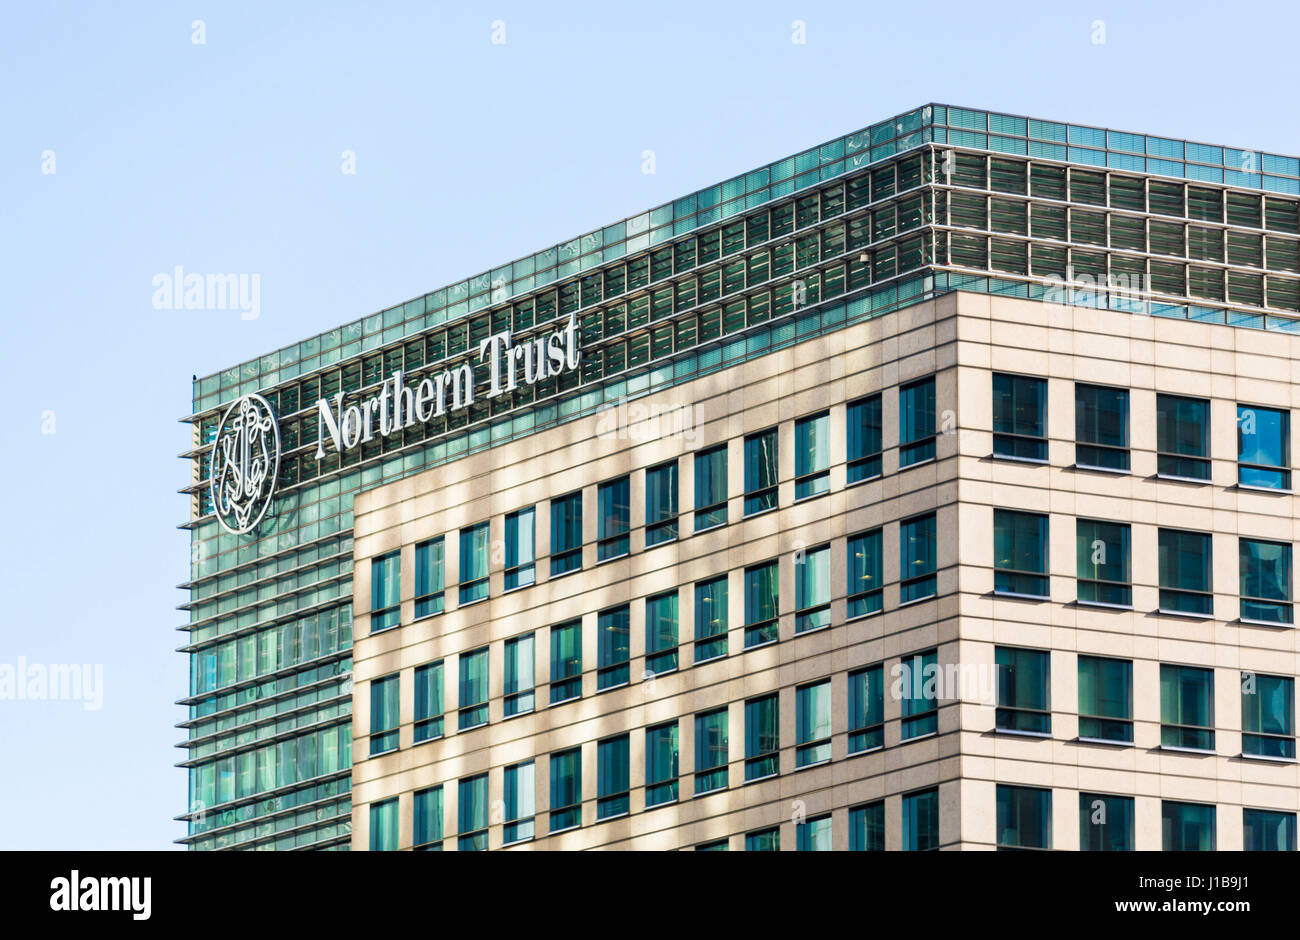 Northern Trust asset management bank, Canary Wharf, London, Docklands, Inghilterra Foto Stock